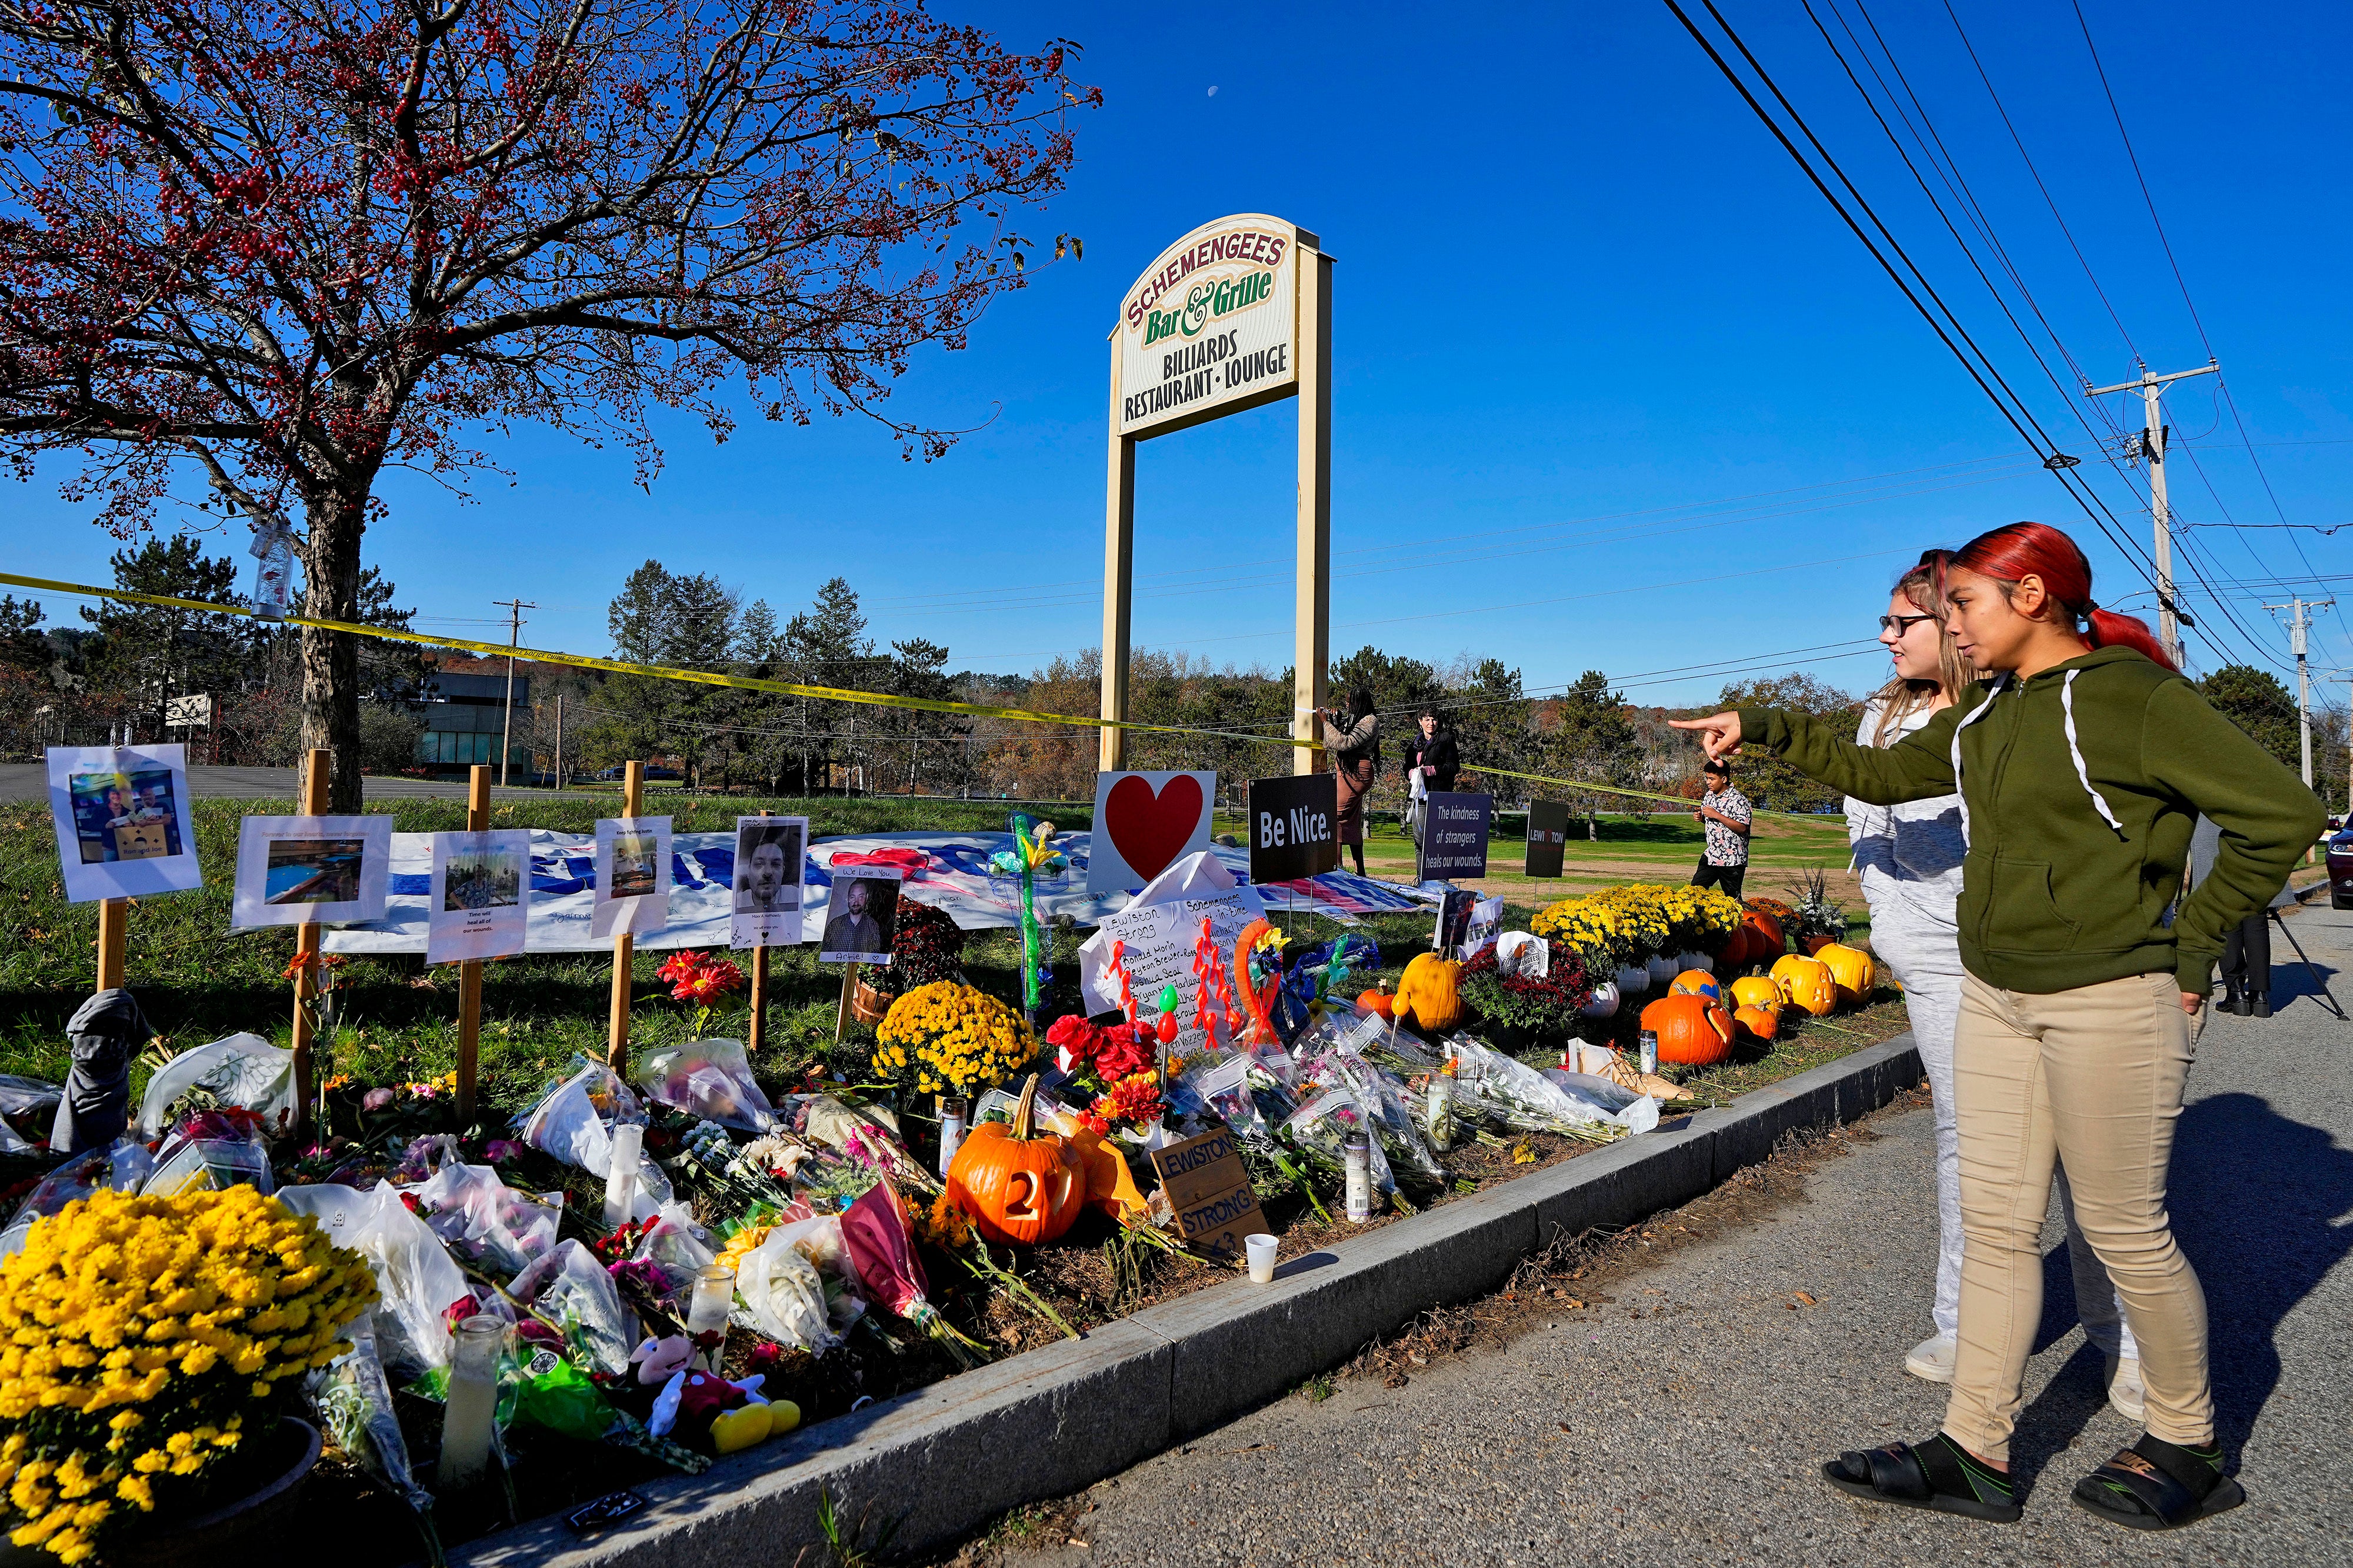 Community members look at a memorial outside Schemengees Bar & Grille about one week after a mass shooting in Lewiston, Maine